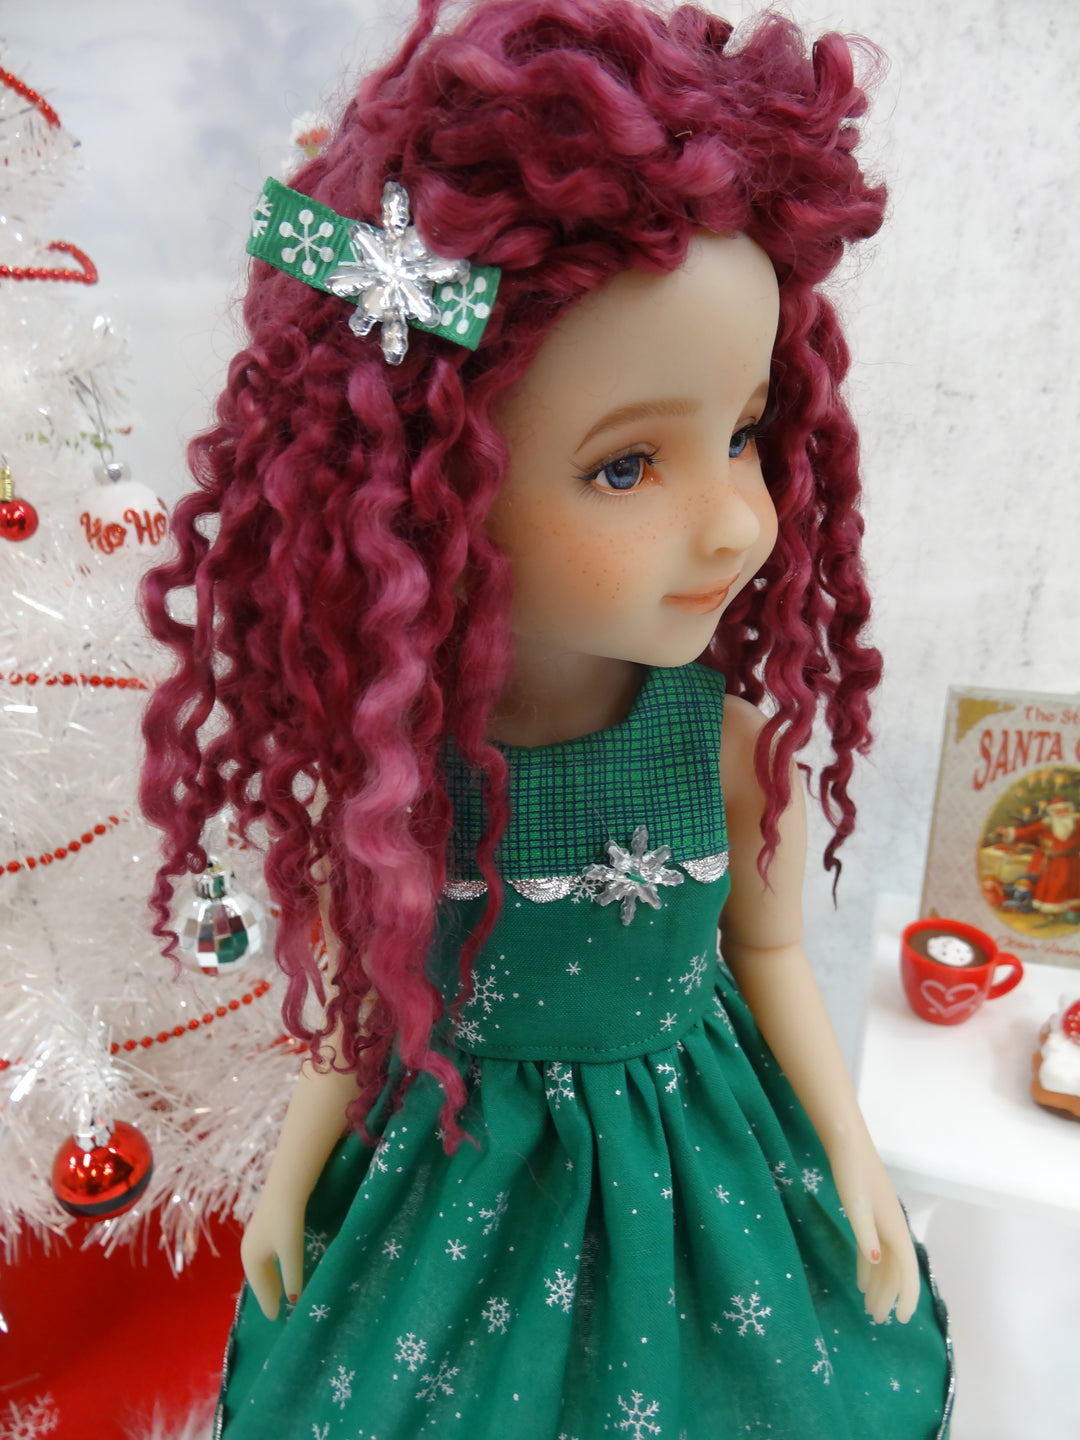 Evergreen Snowflakes - dress with shoes for Ruby Red Fashion Friends doll